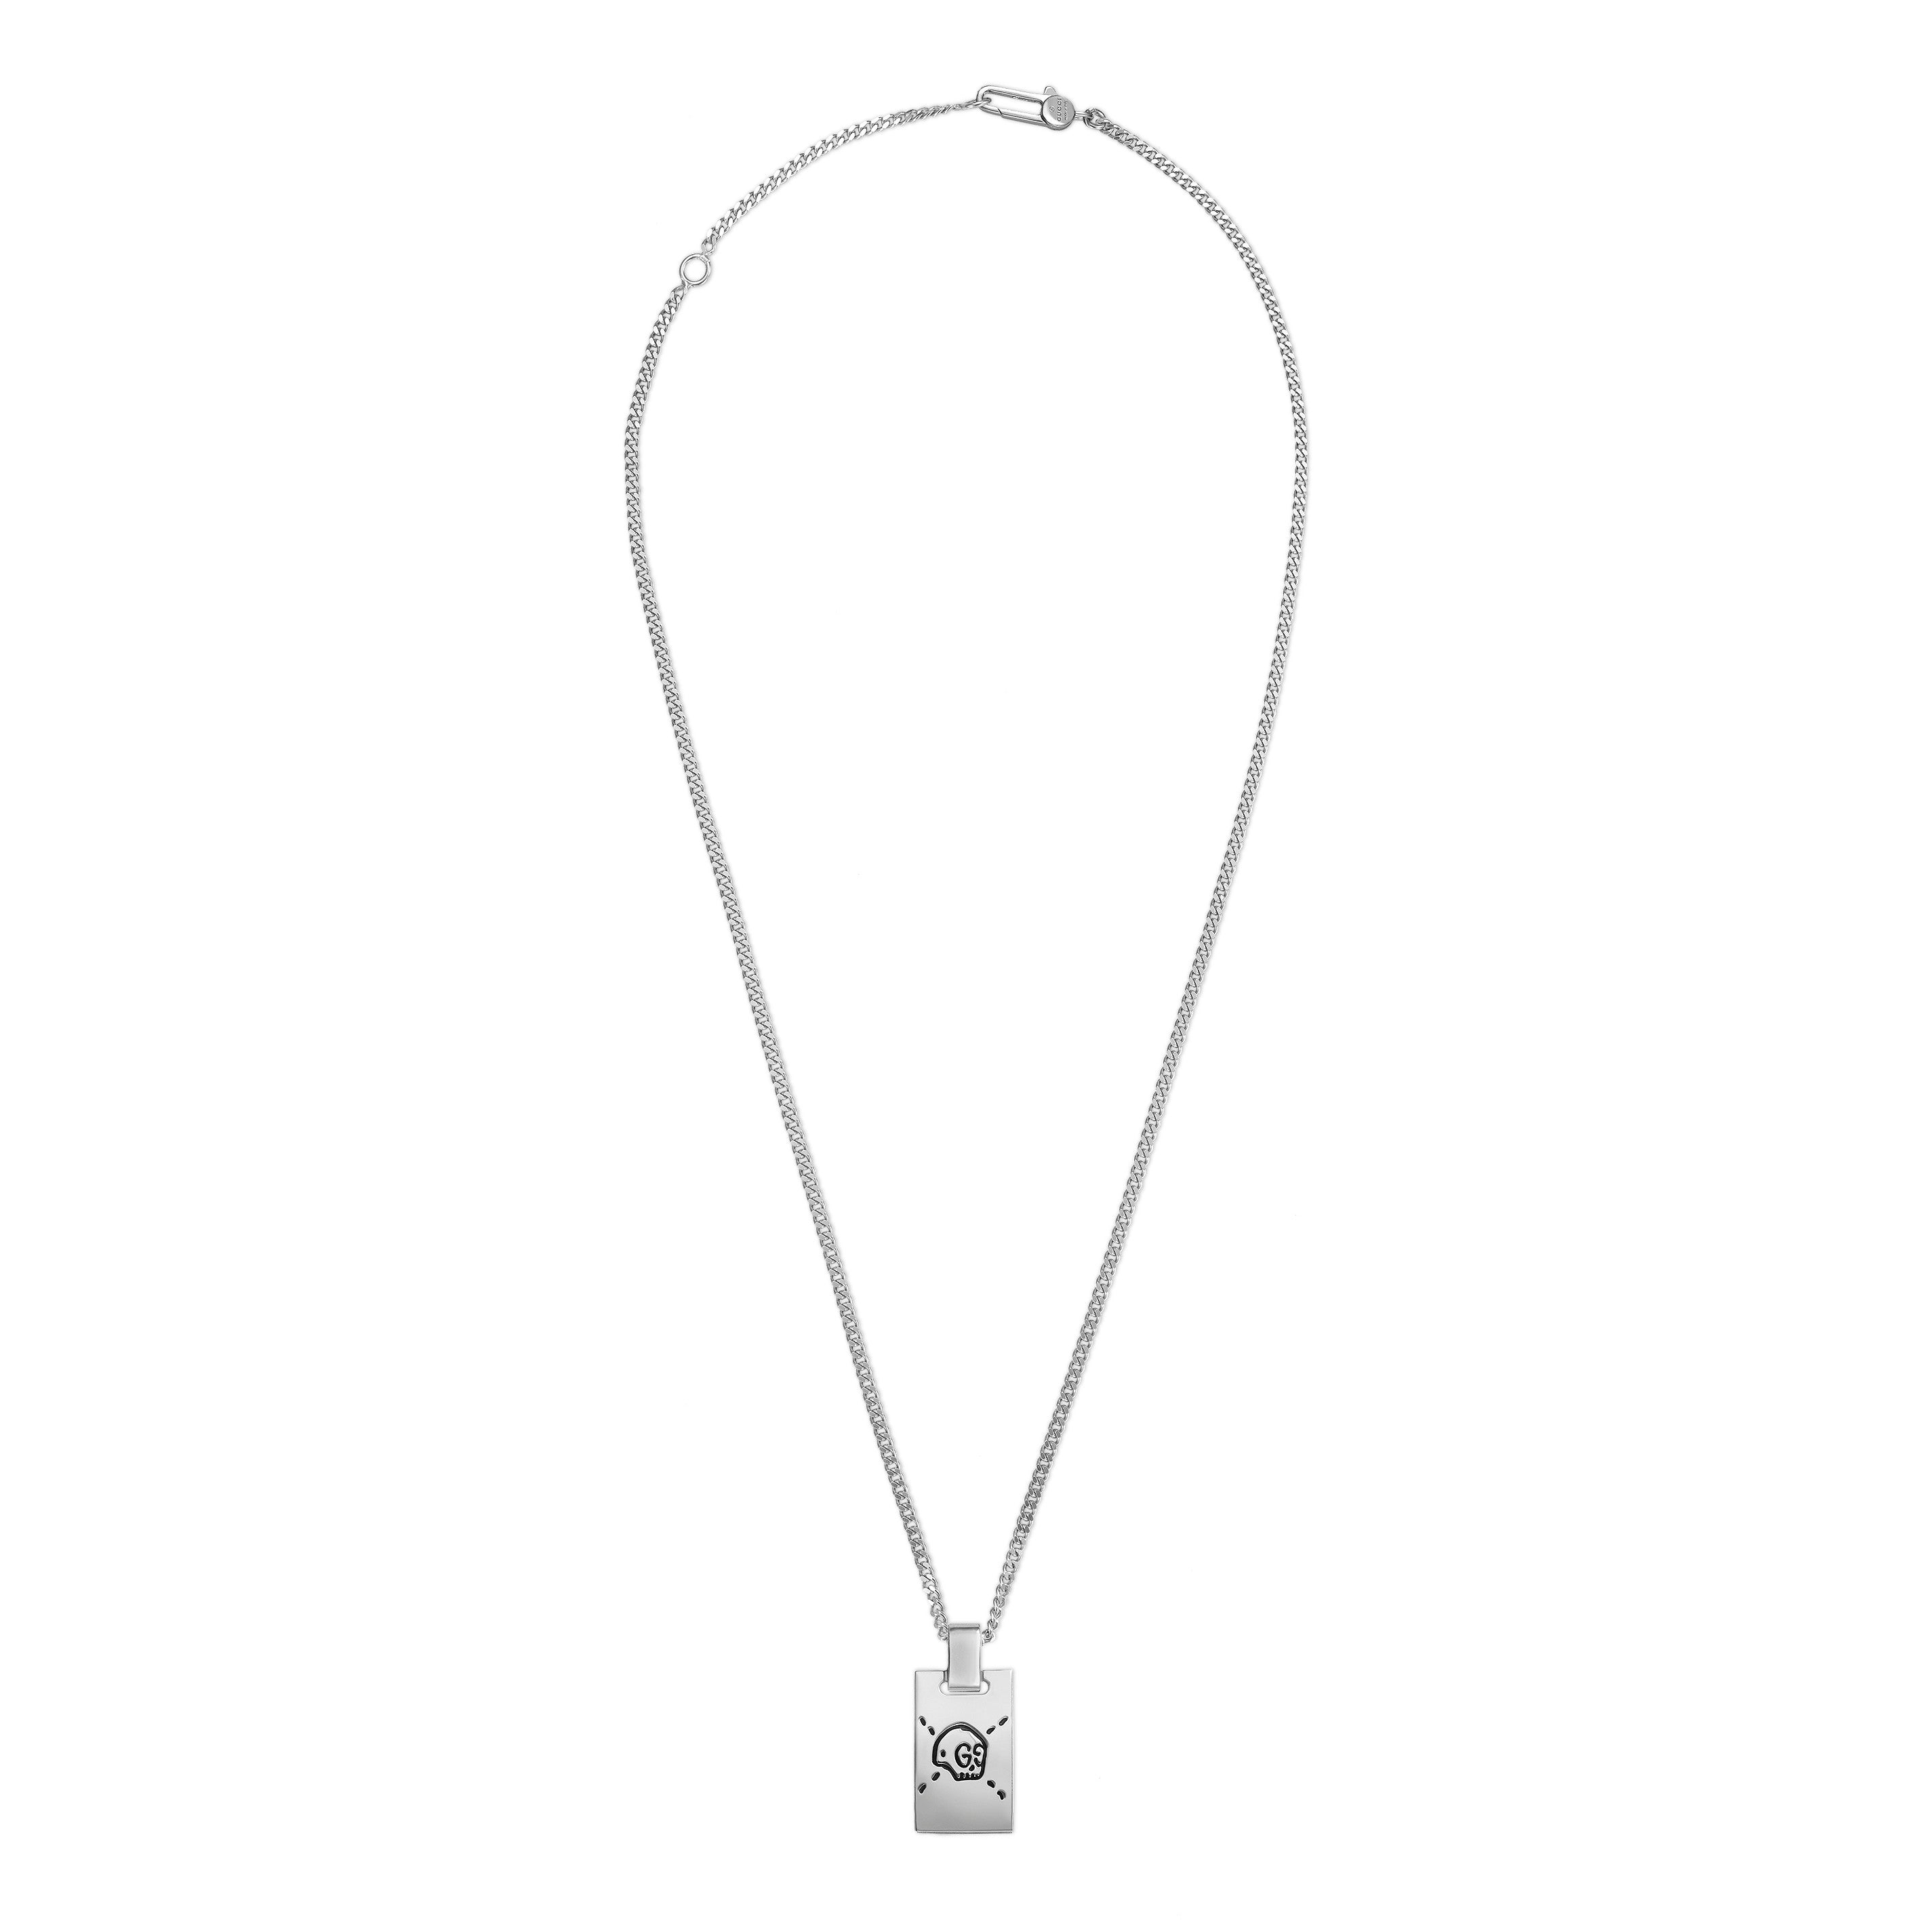 GucciGhost pendant necklace in silver YBB455315001 Gucci Jewelry